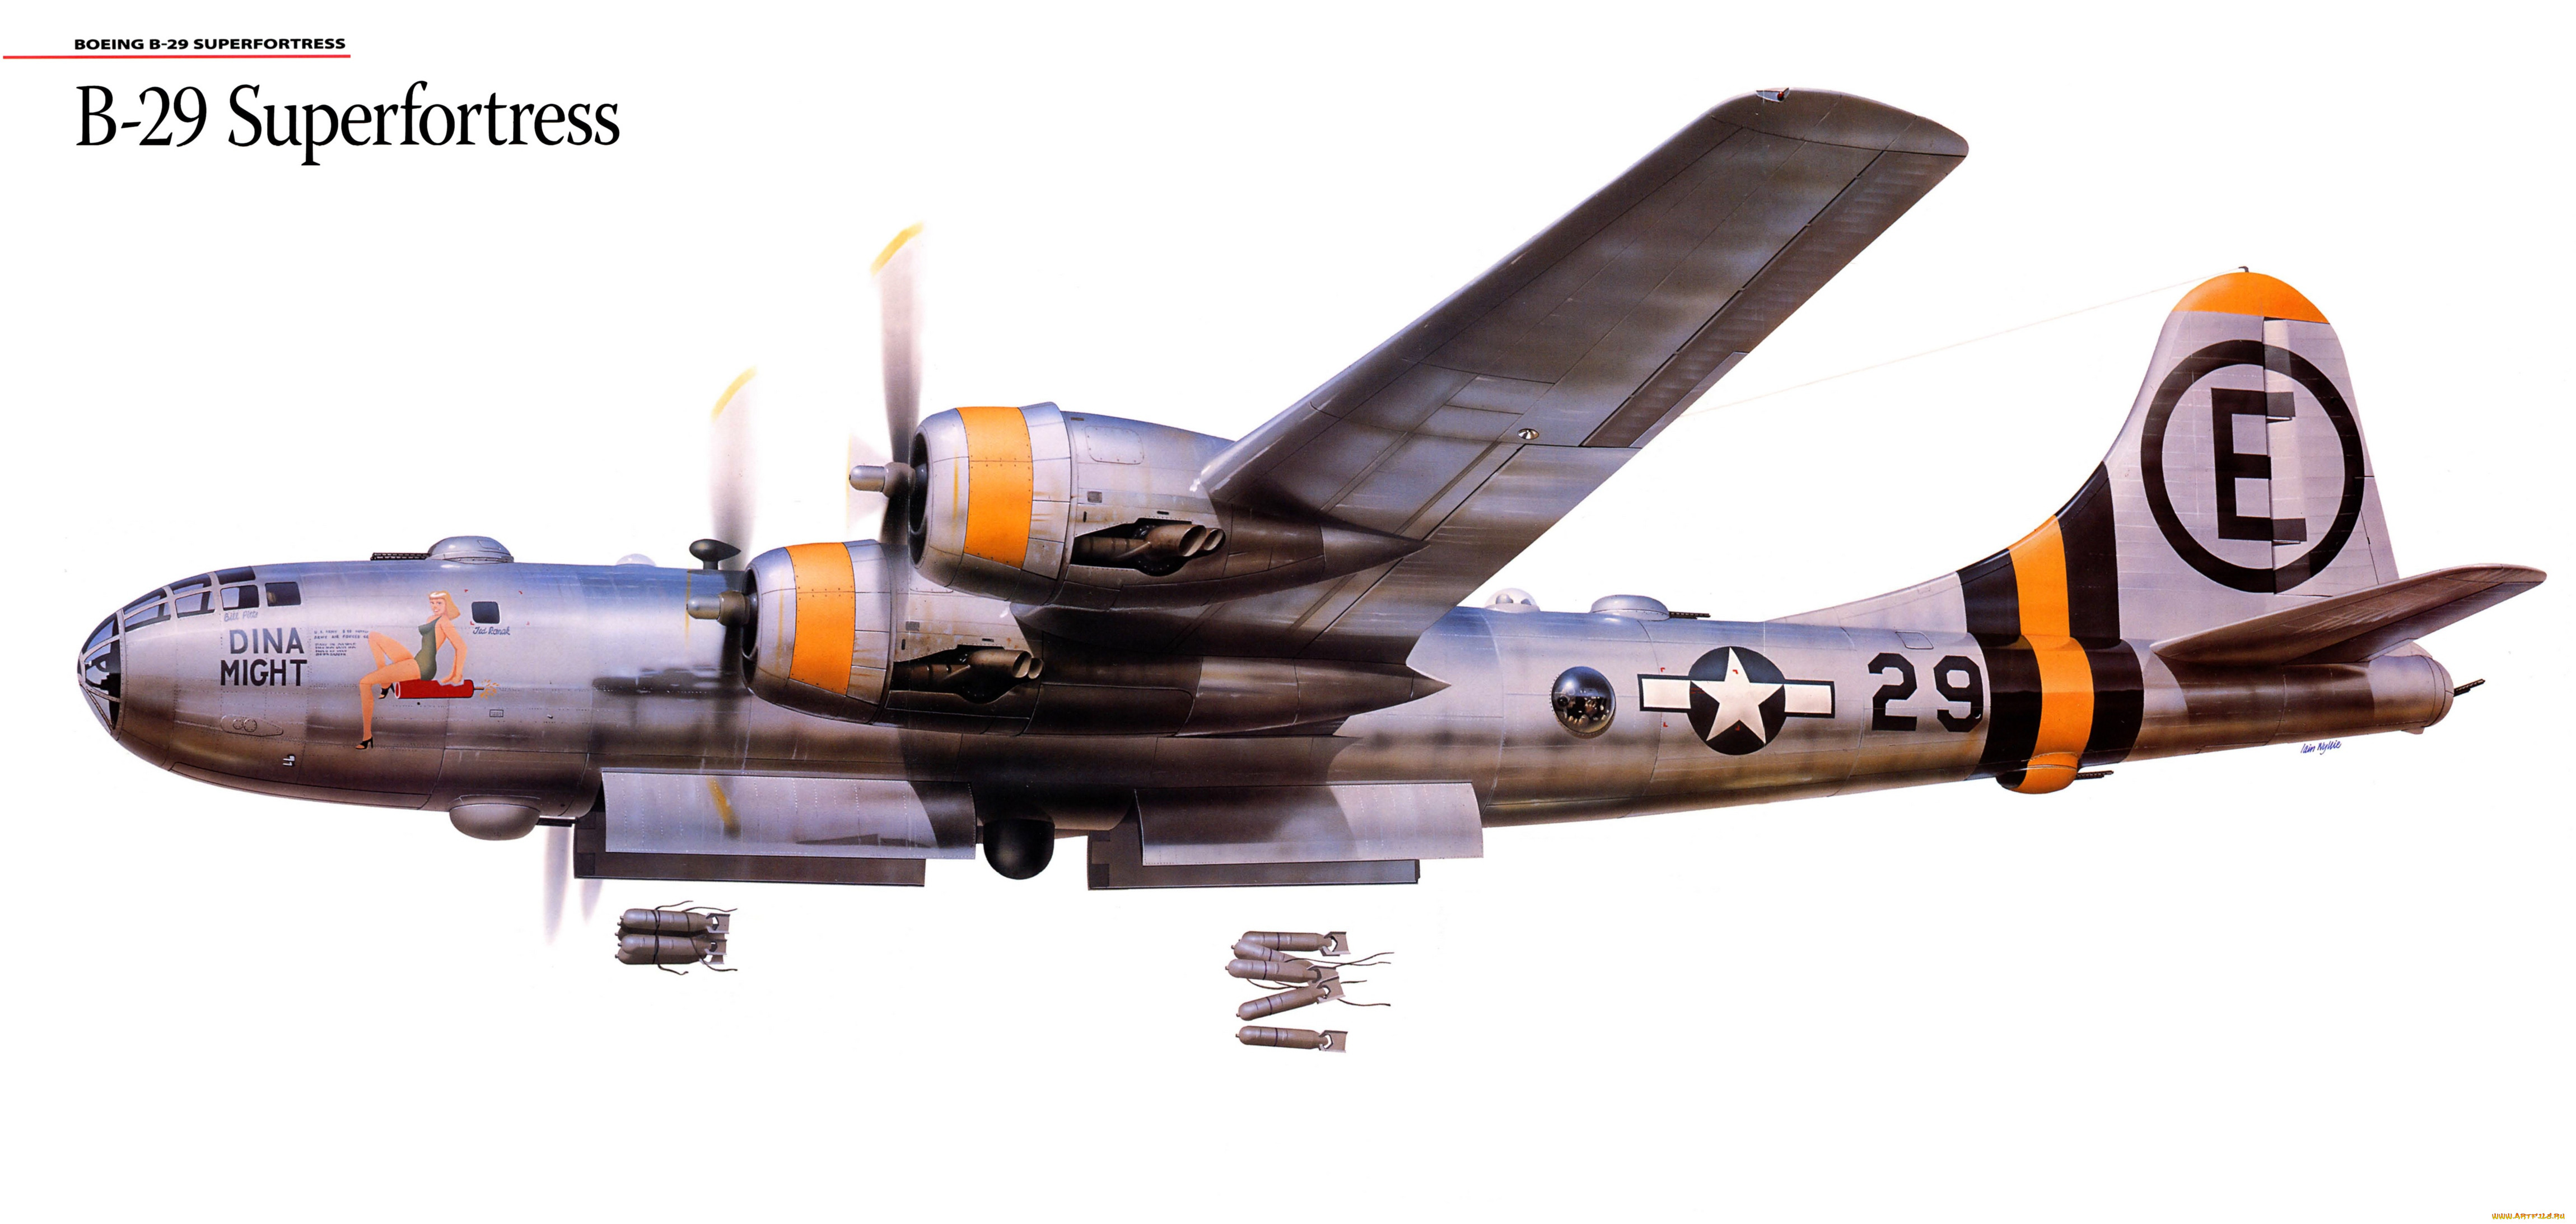 , 3, , v-graphic, boeing, , , superfortress, b, 29